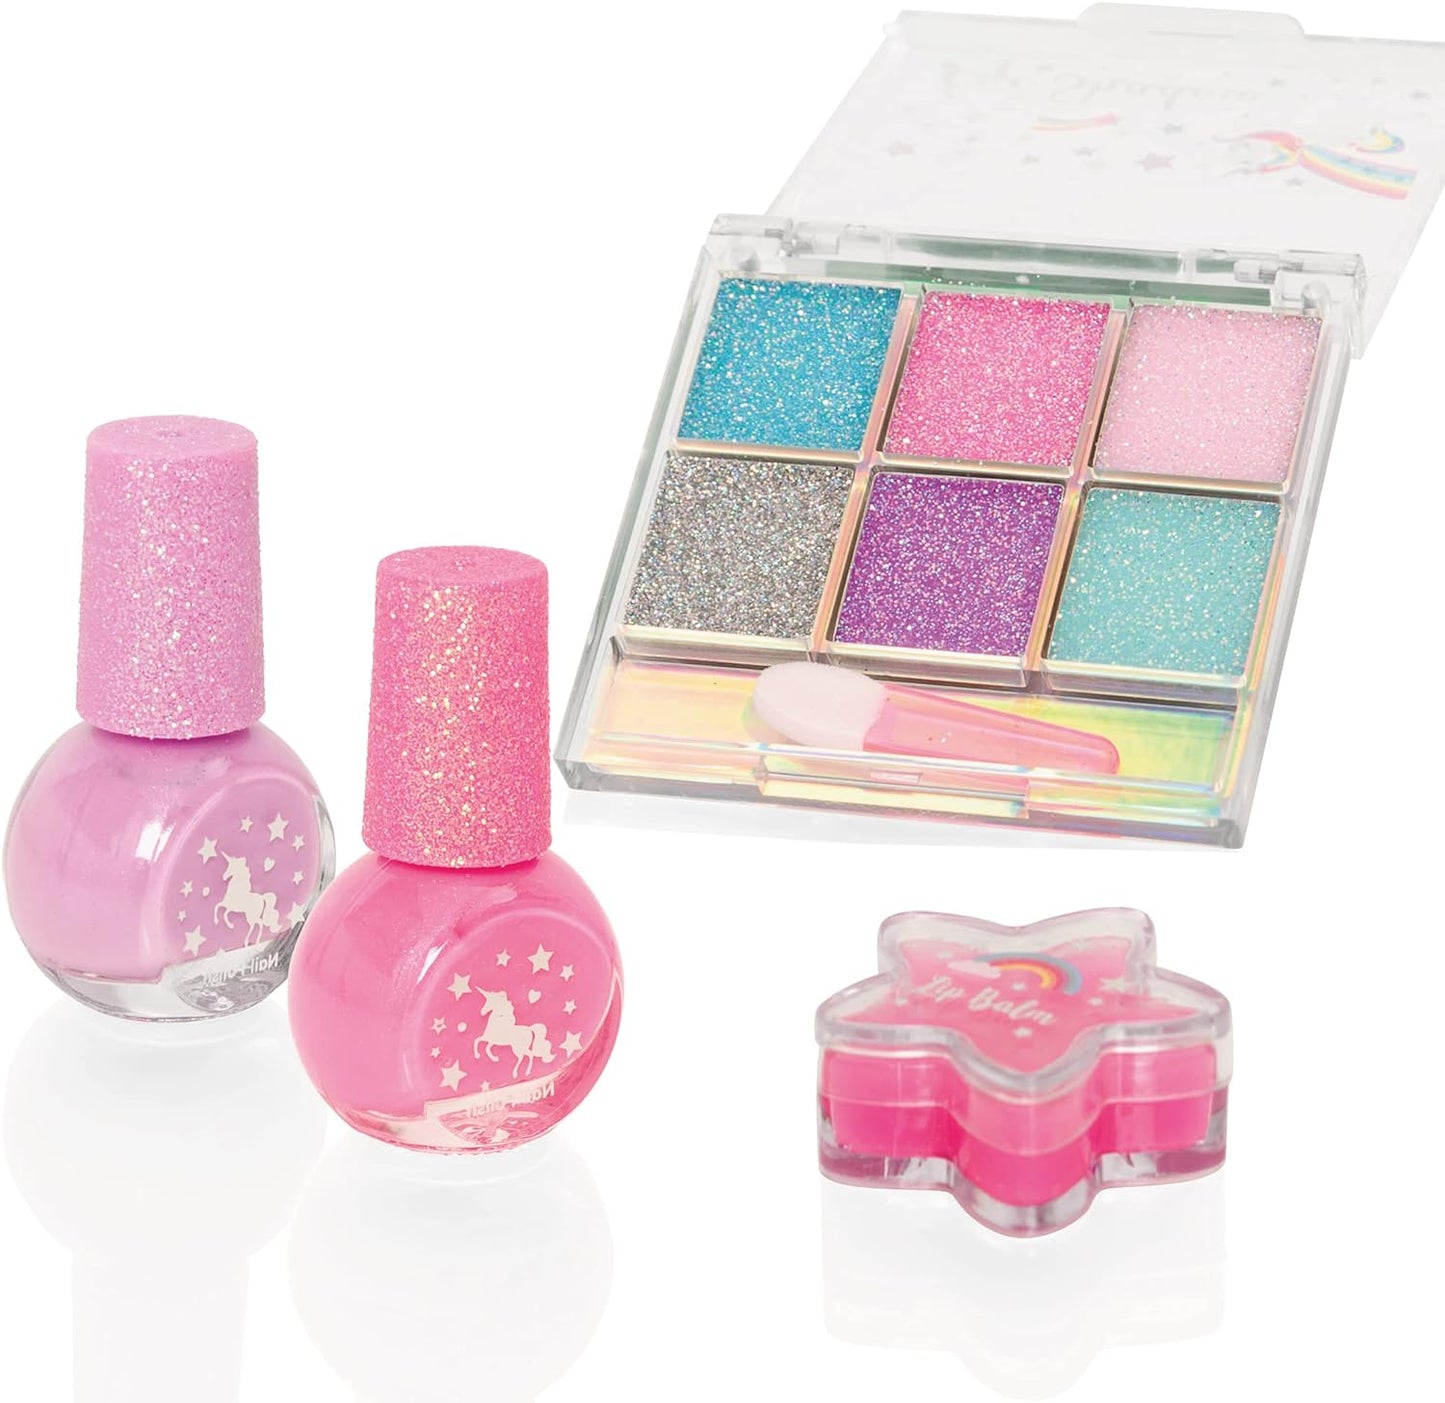 Simply Trend Unicorn Makeup Kit - Glamorous Cosmetic Set for Girls with Lip Gloss, Nail Polishes, and Glitter Essentials